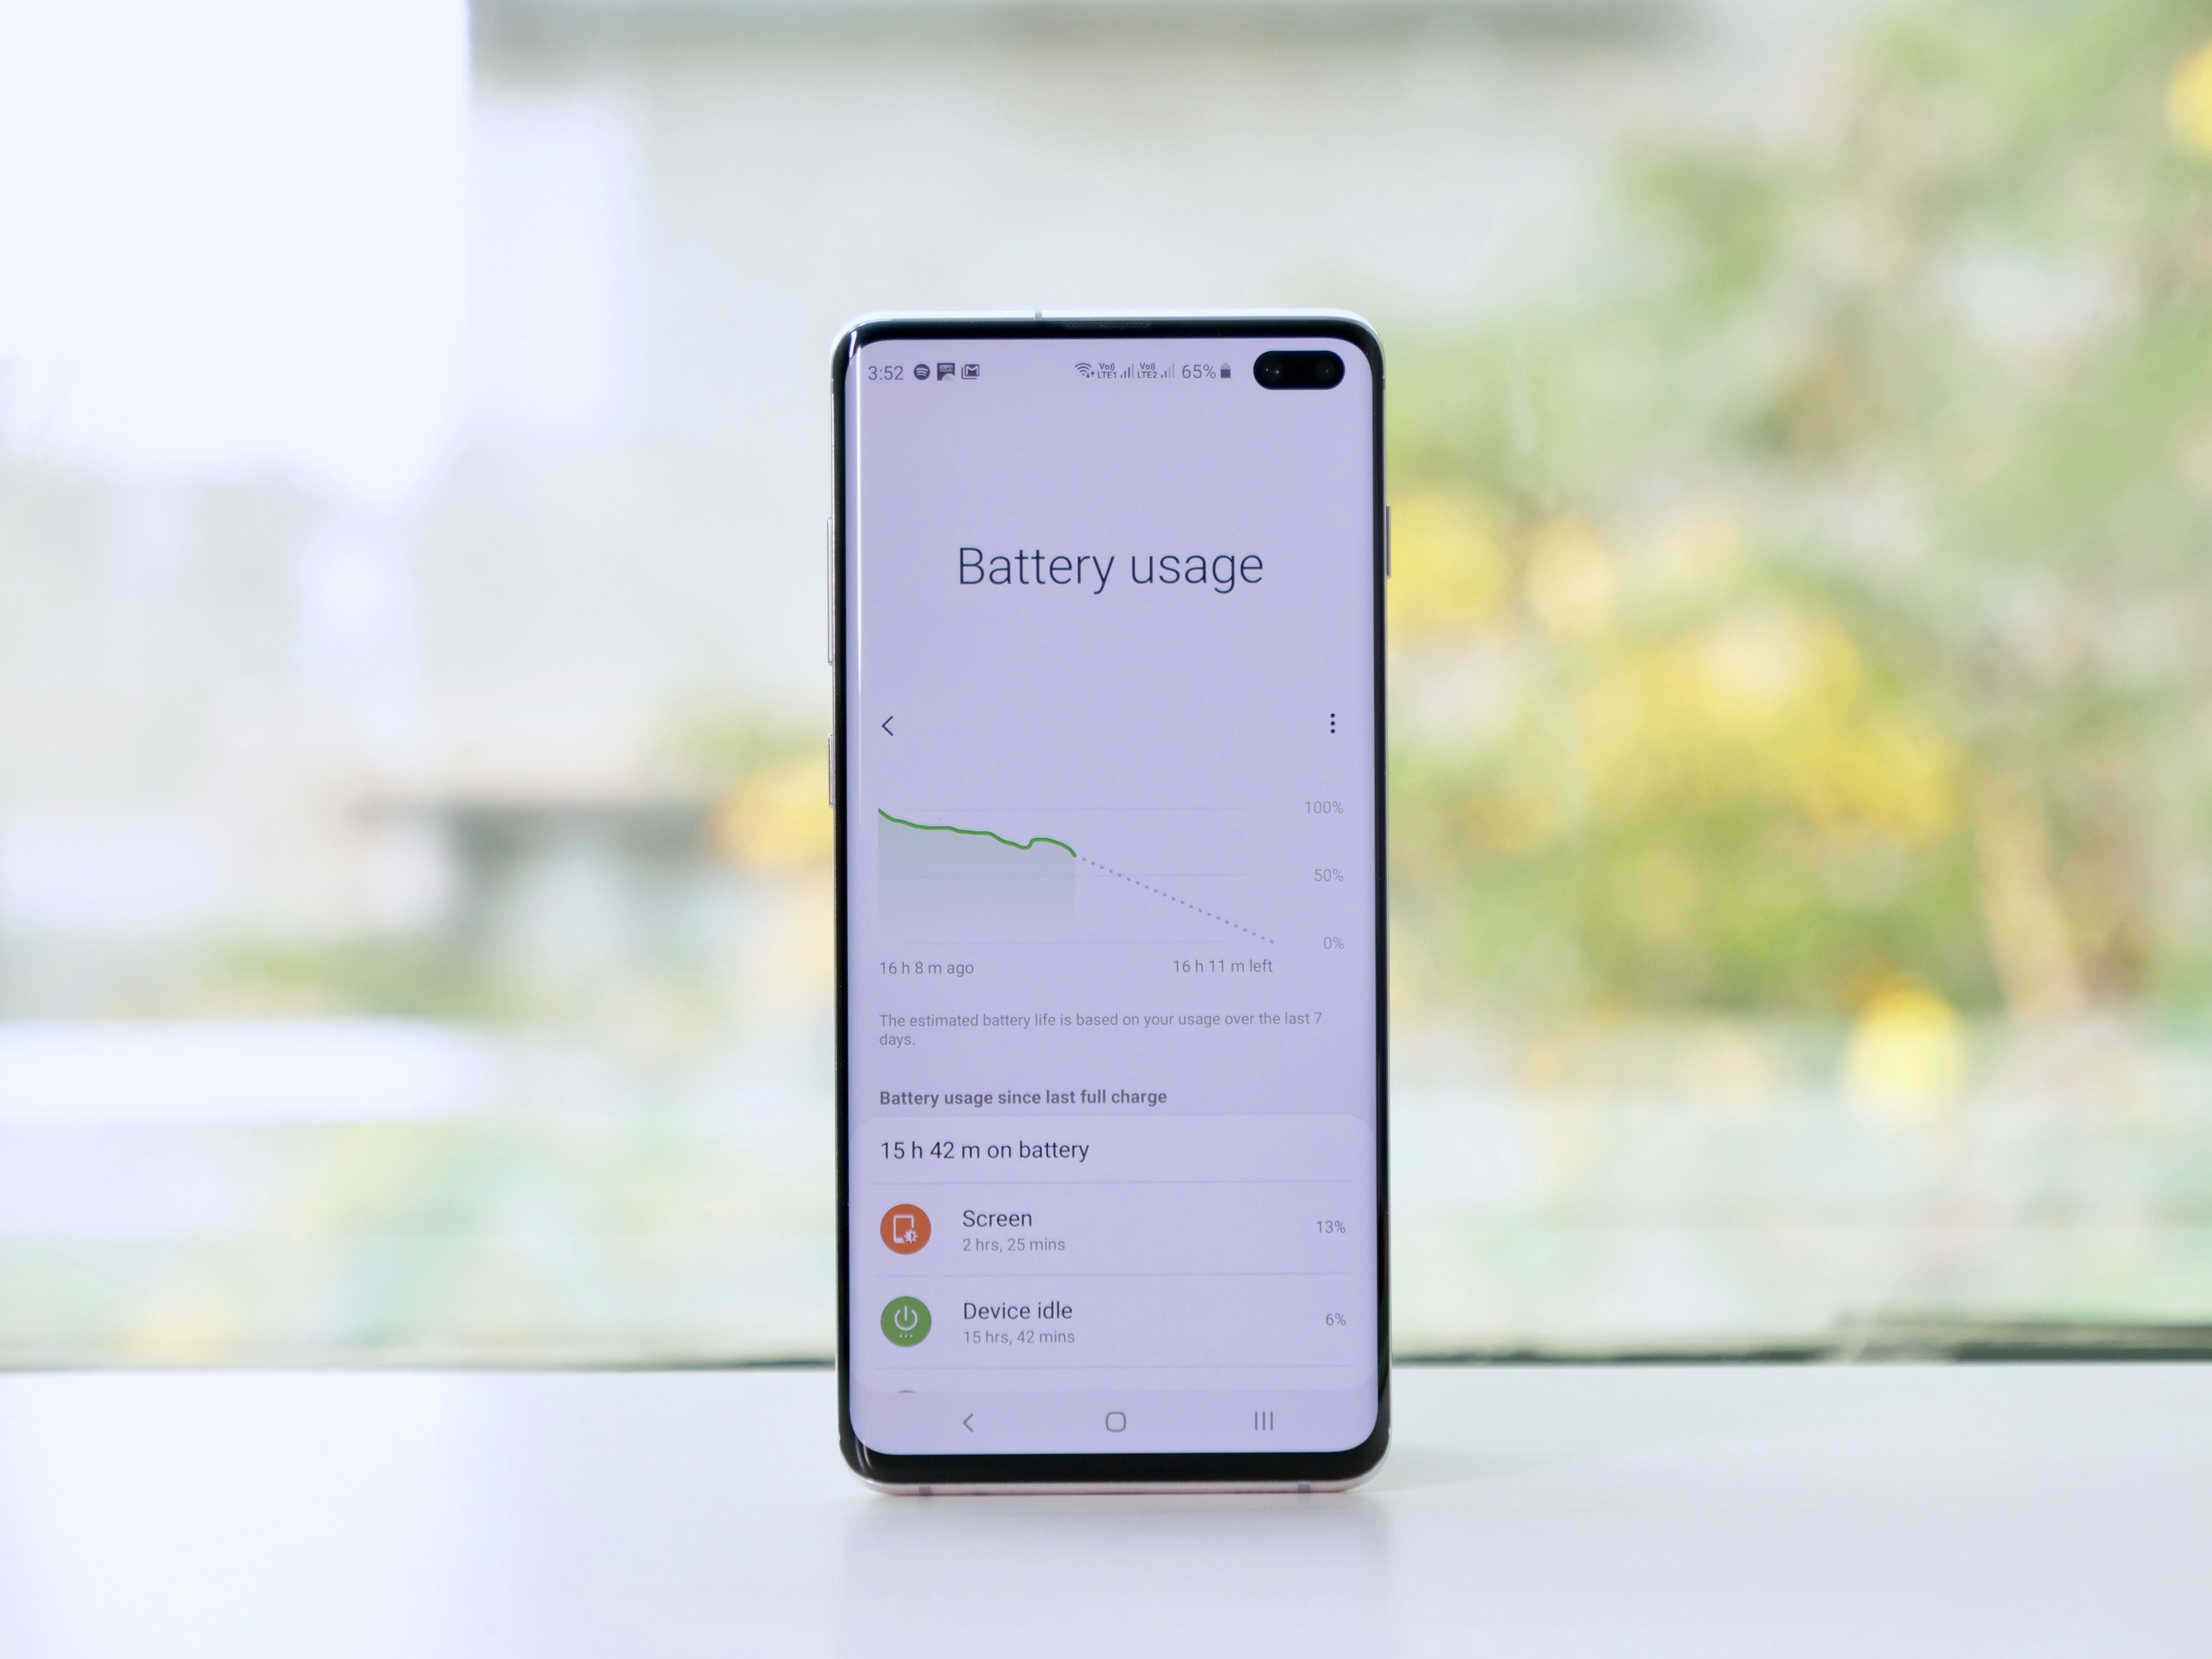 Samsung Galaxy S10 Plus review: Killer cameras and battery life might meet  their match in the Note 10 - CNET